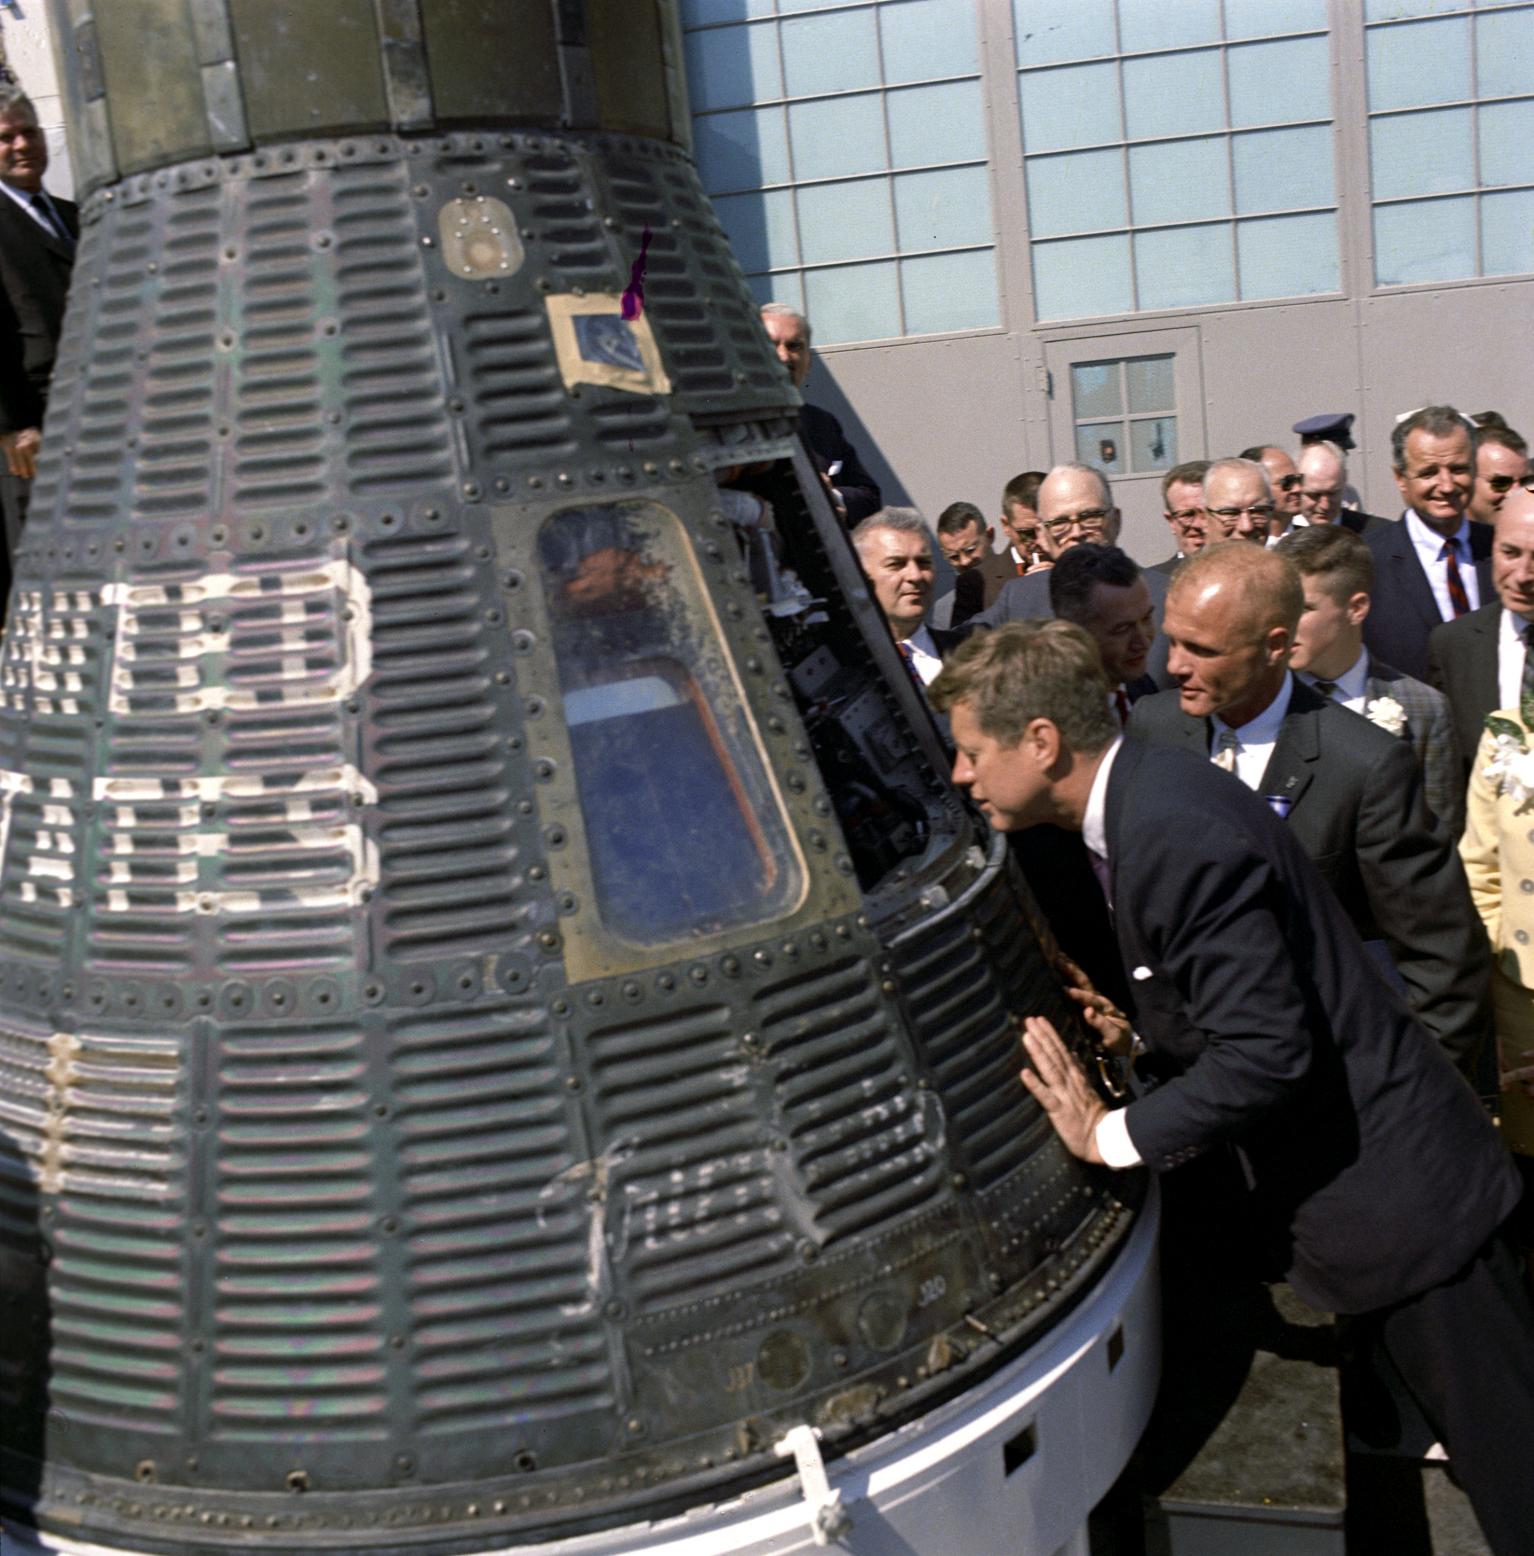 Kennedy Tours Cape Canaveral and Friendship 7 Capsule